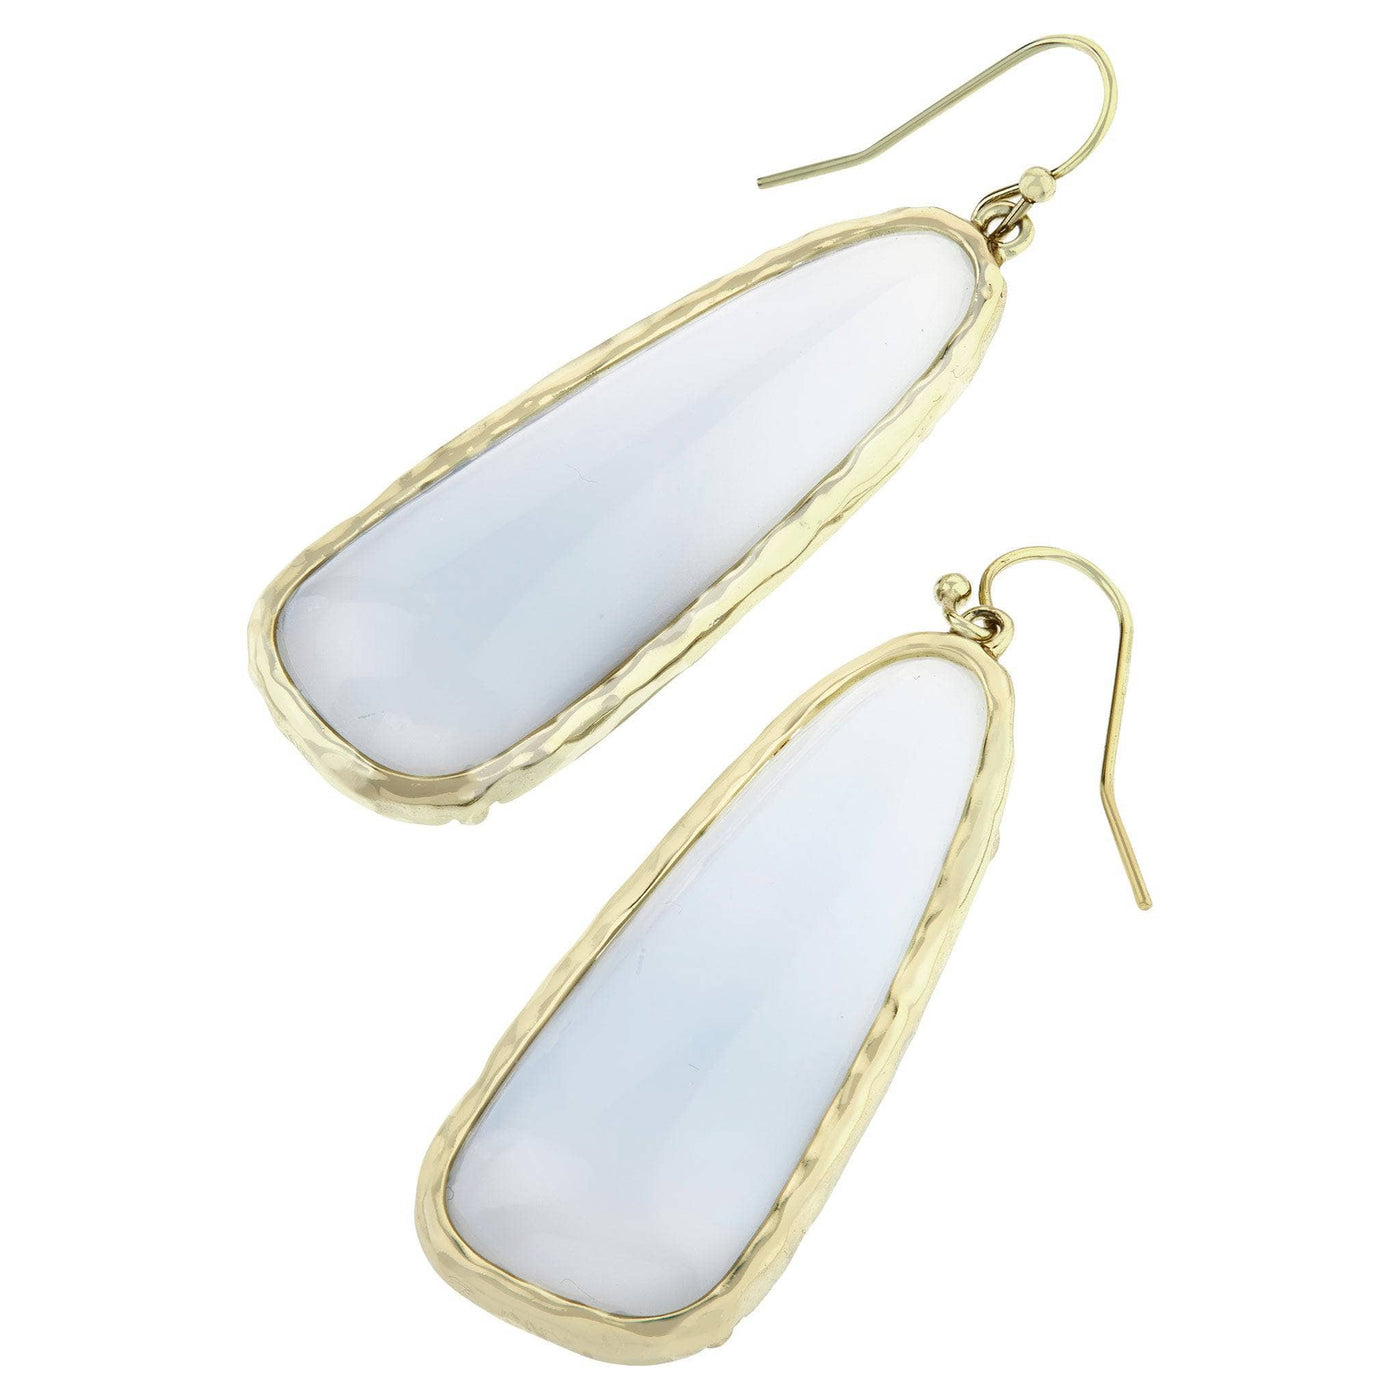 Harlow & Dylan by HEIDI DAUS®"Blue Chalcedony" Natural Beauty Earrings